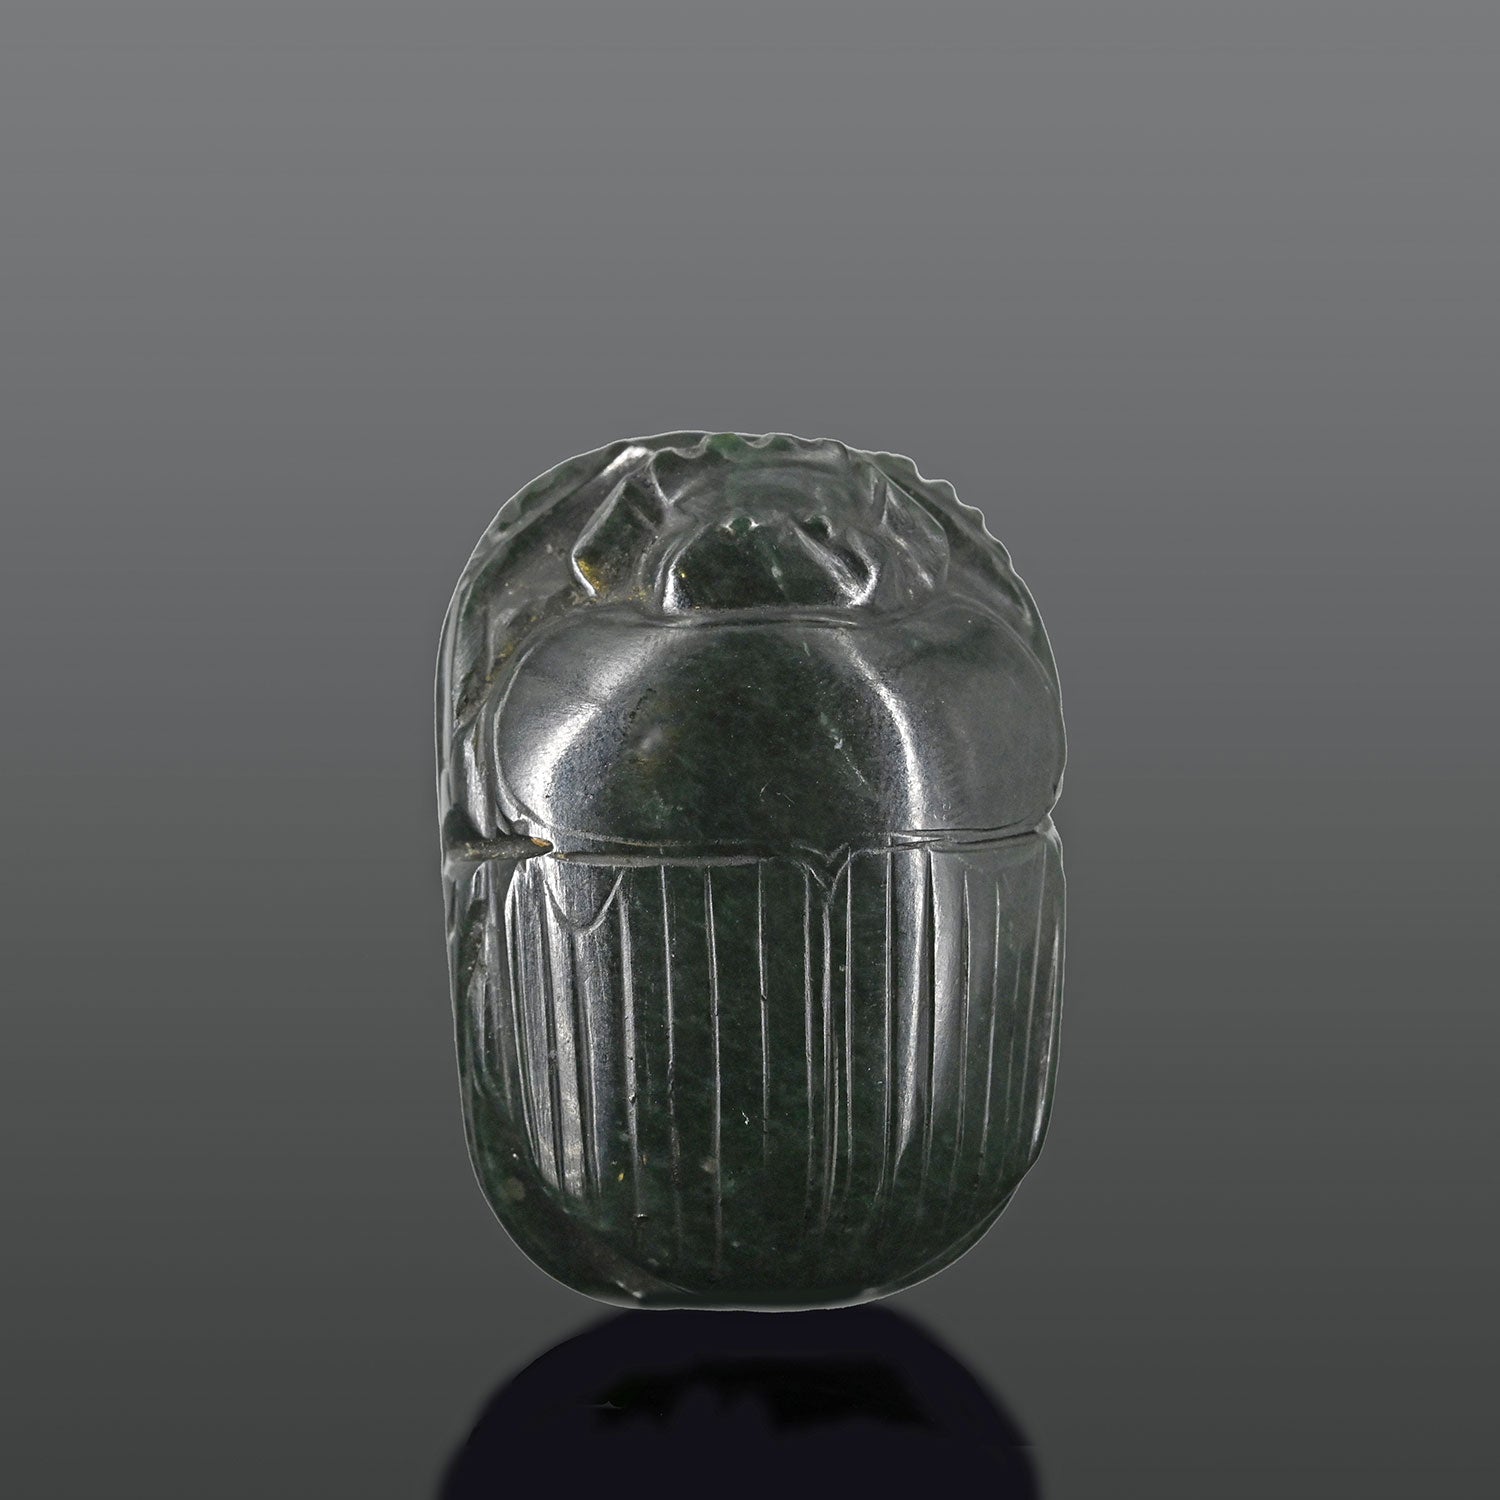 An exhibited Egyptian Green Serpentine Heart Scarab, 26th Dynasty, ca. 664 - 525 BCE